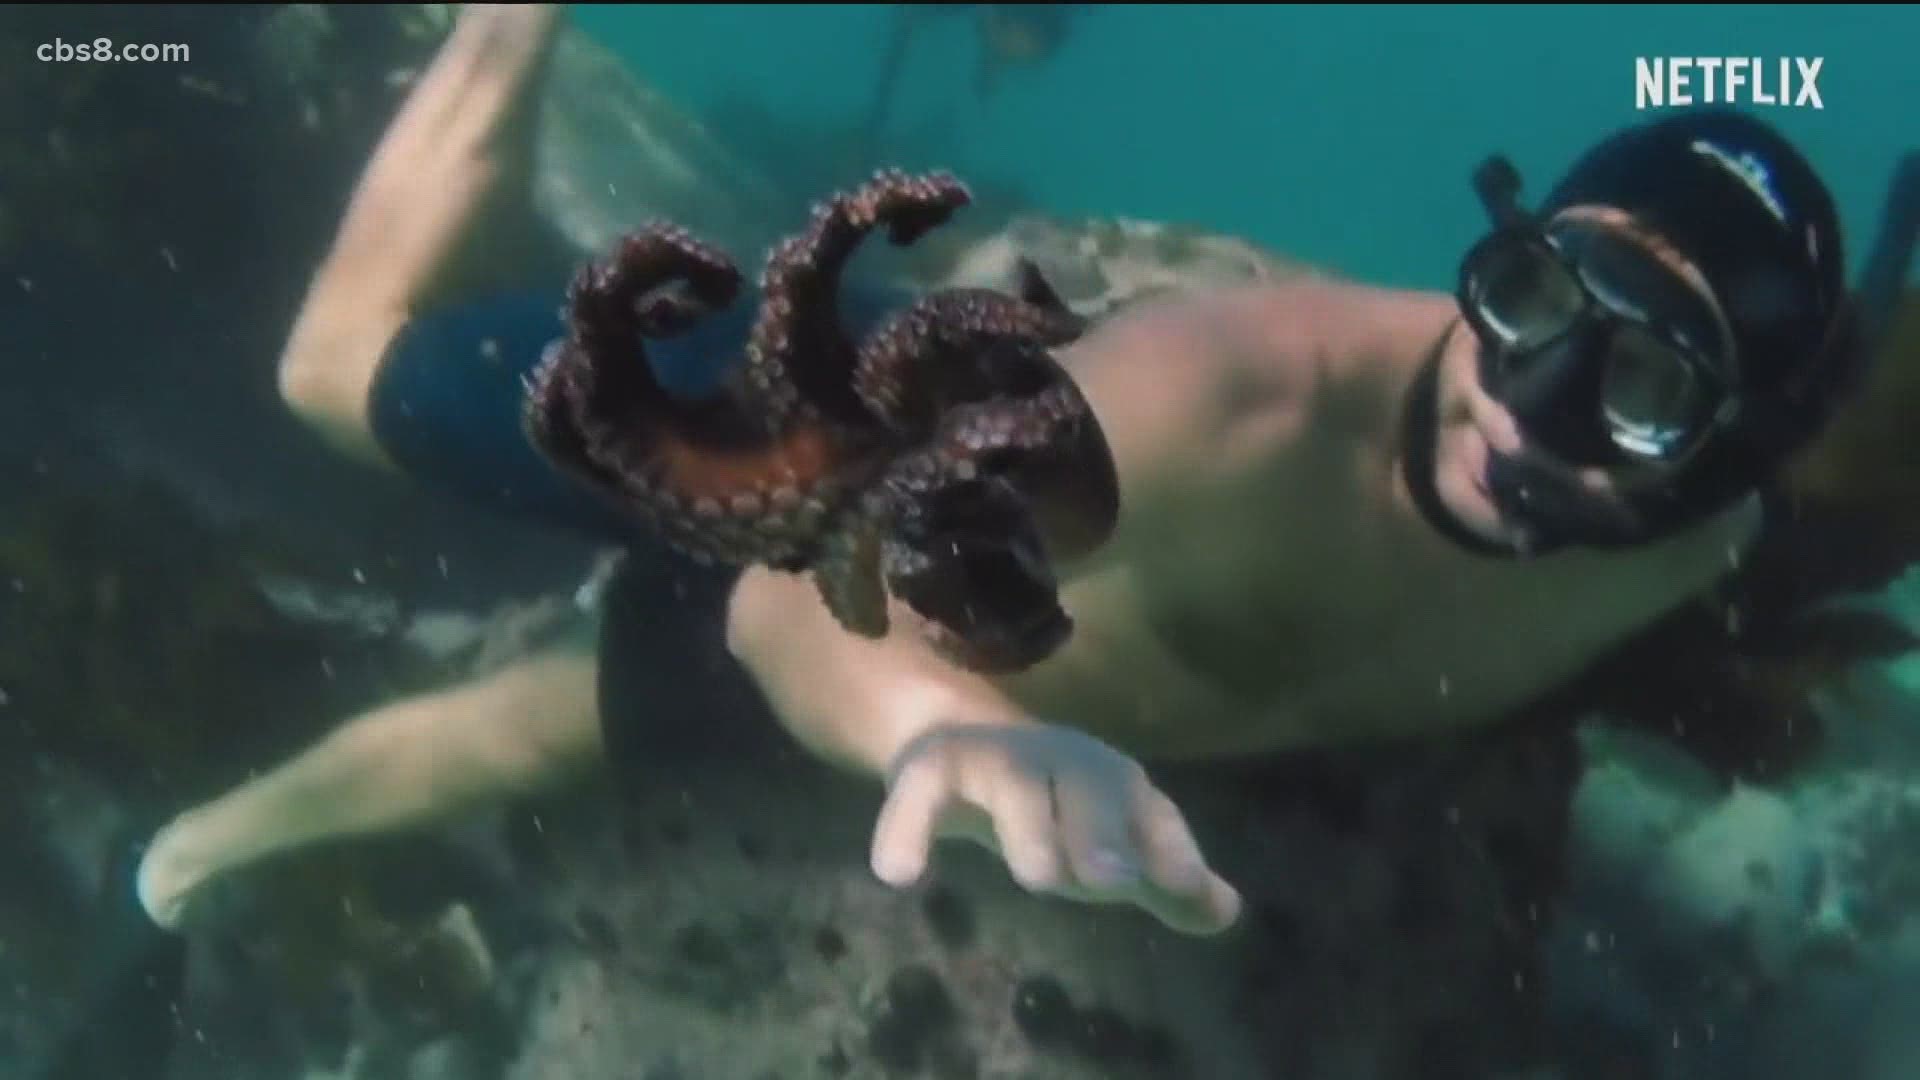 The octopus is known as one of the smartest animals in the sea, & after watching My Octopus Teacher, News 8 decided to find what how local cephalopods can teach us.